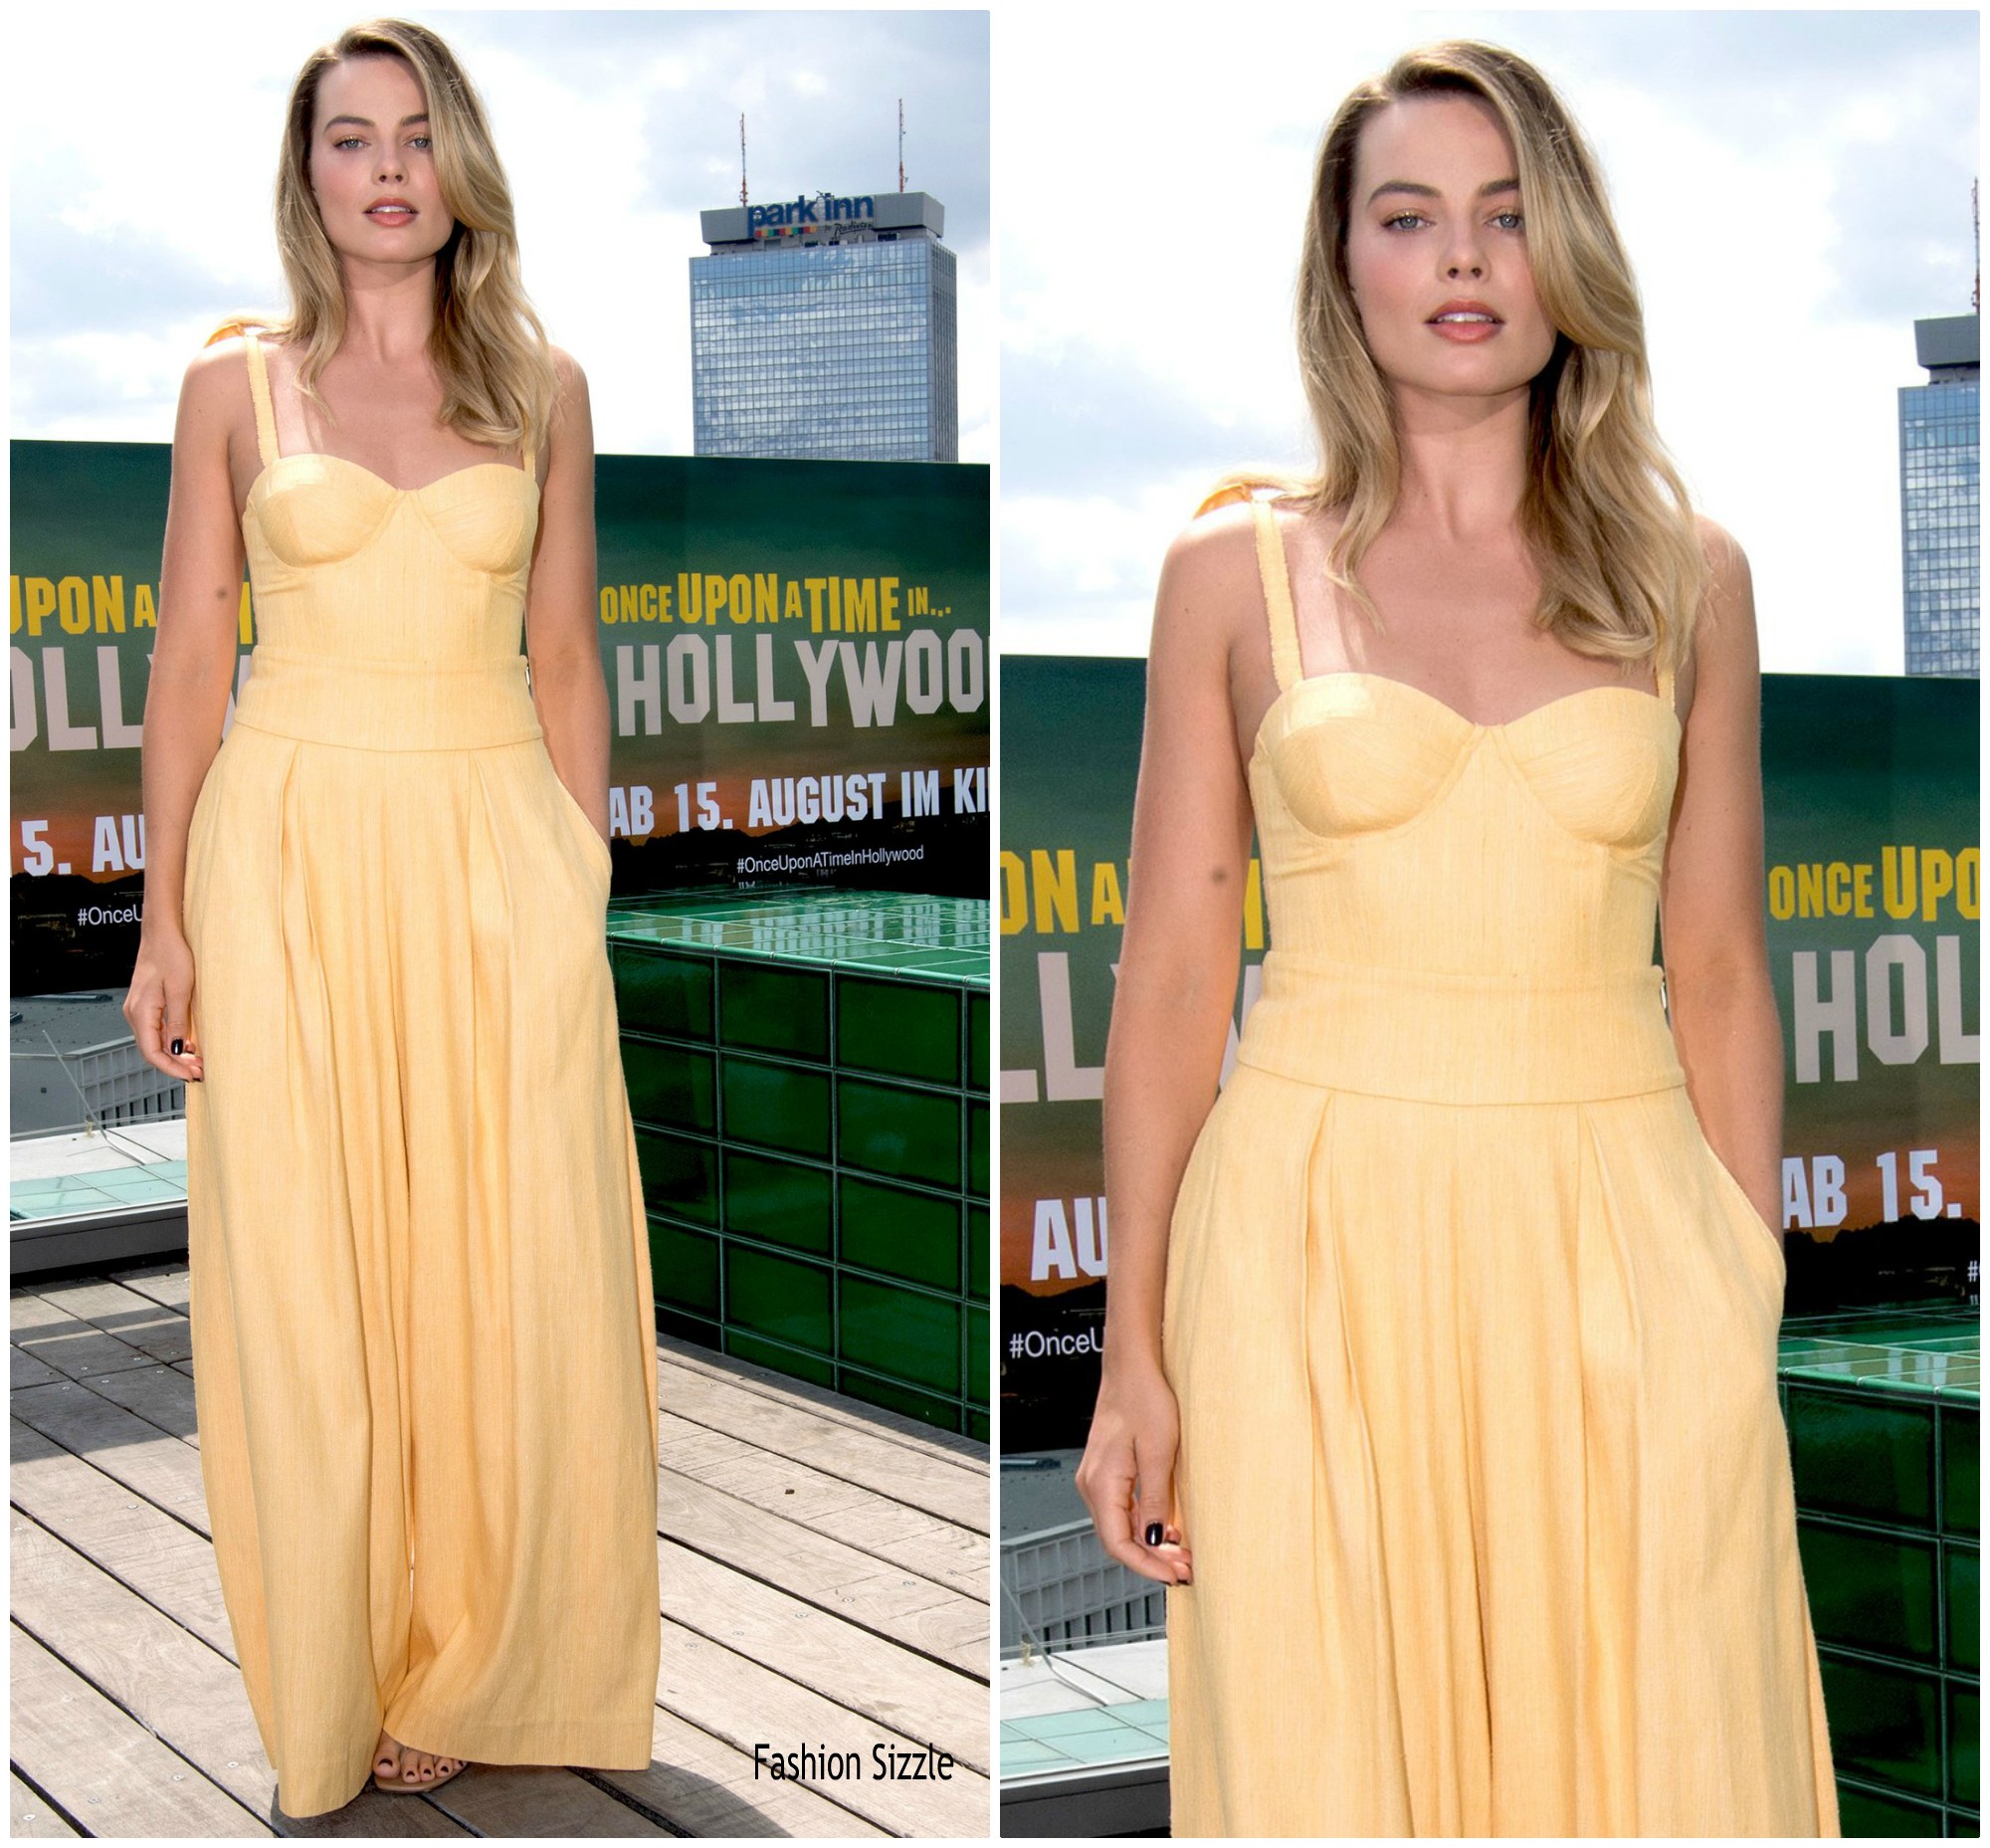 margot-robbie-in-rosie-assoulin-once-upon-a-time-in-hollywood-berlin-photocall